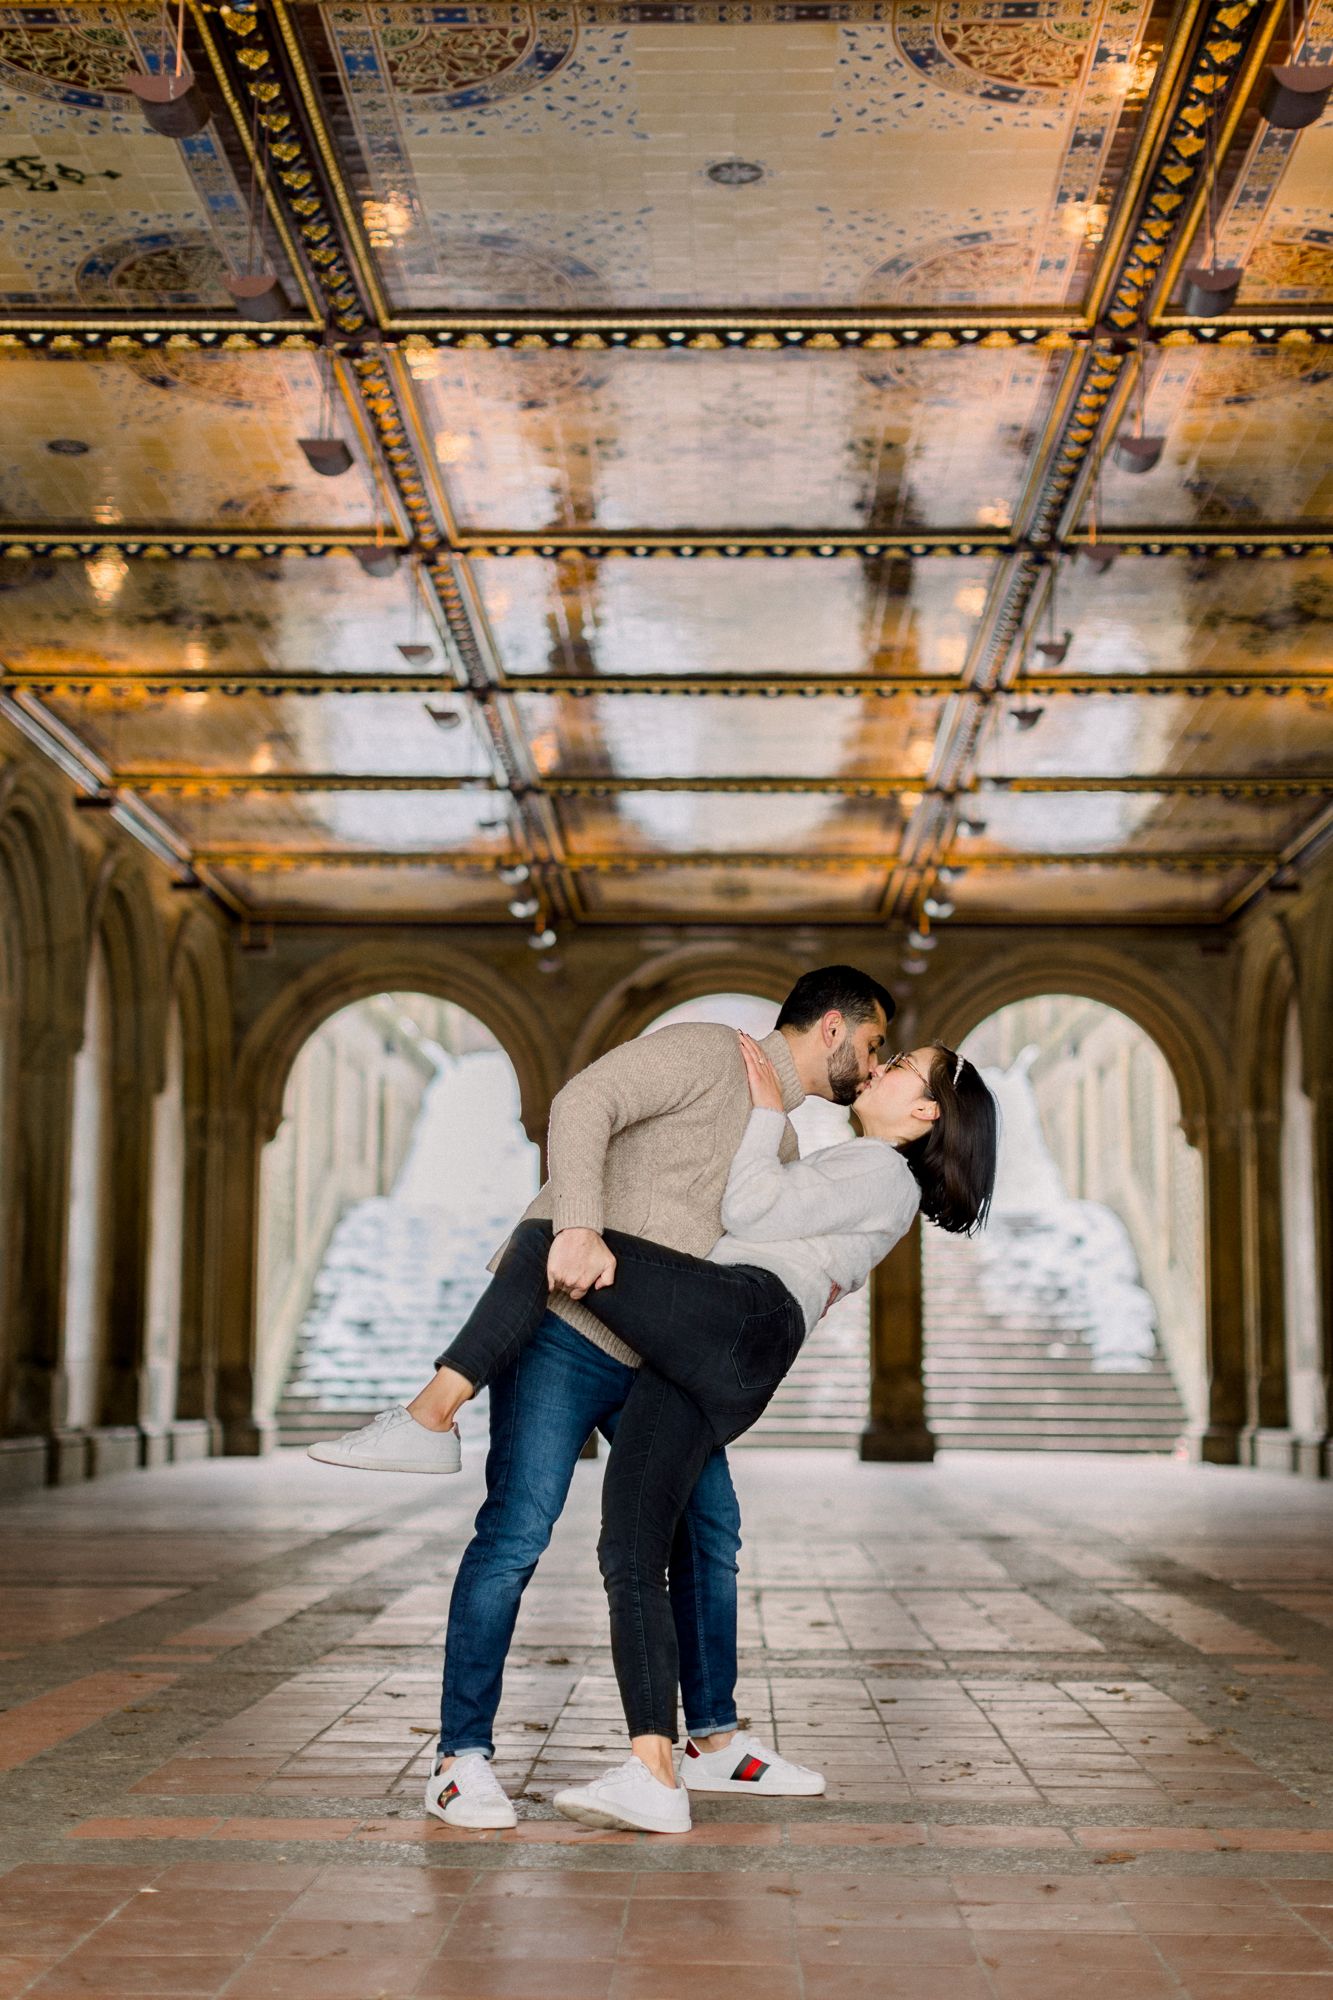 Stunning Winter Engagement Photos in Central Park NYC